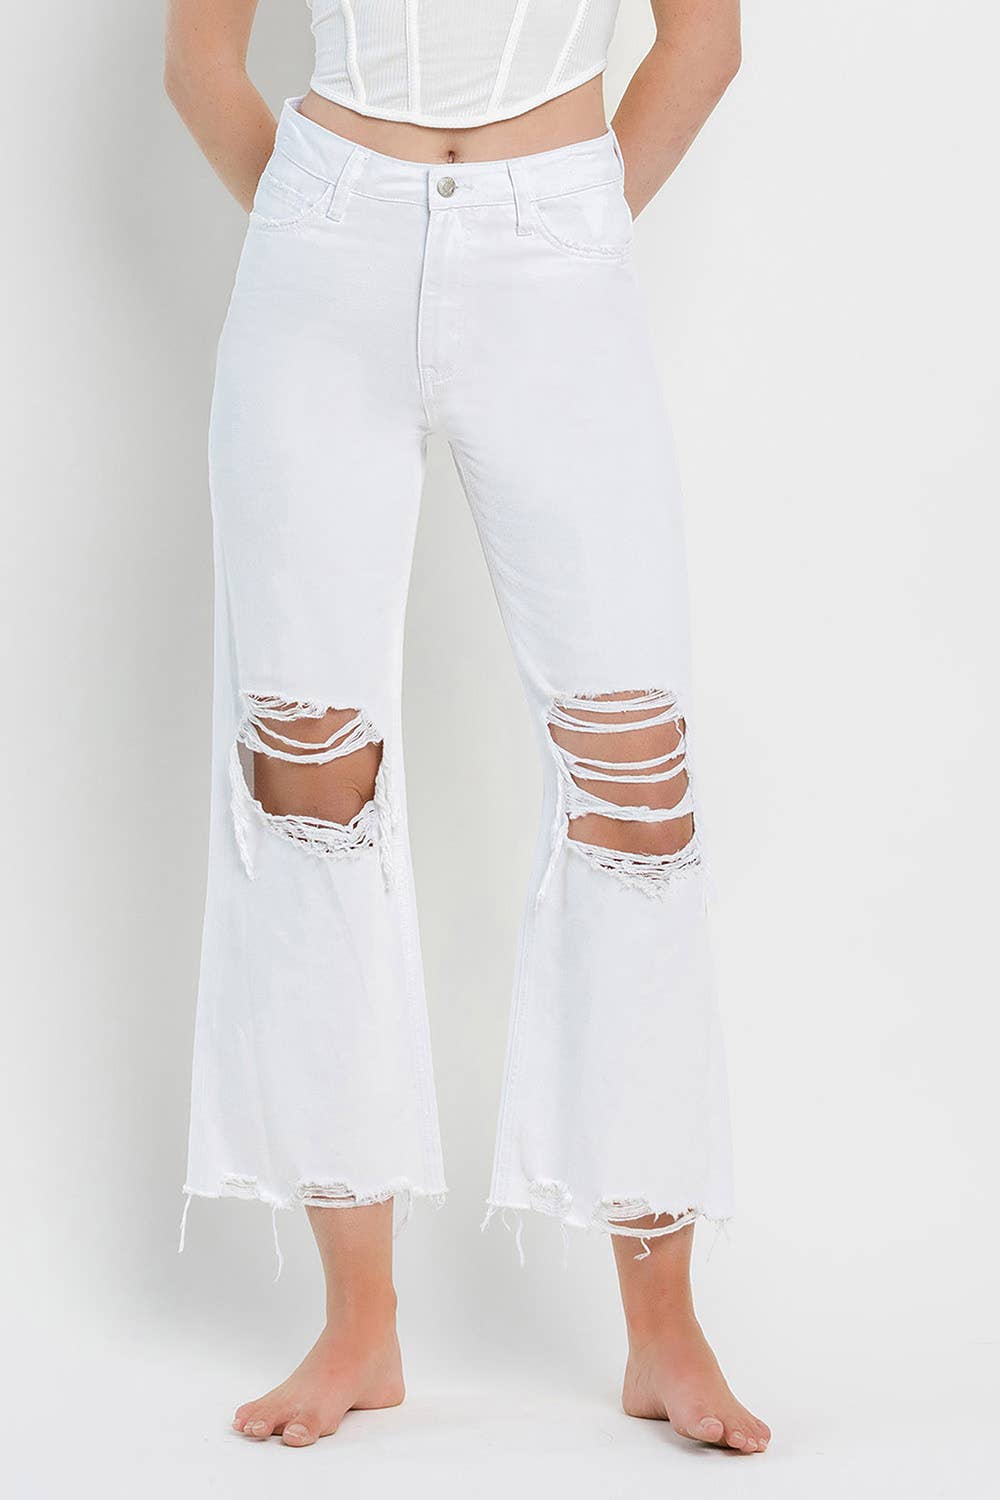 Optic White 90's Vintage High Rise Flare Jeans